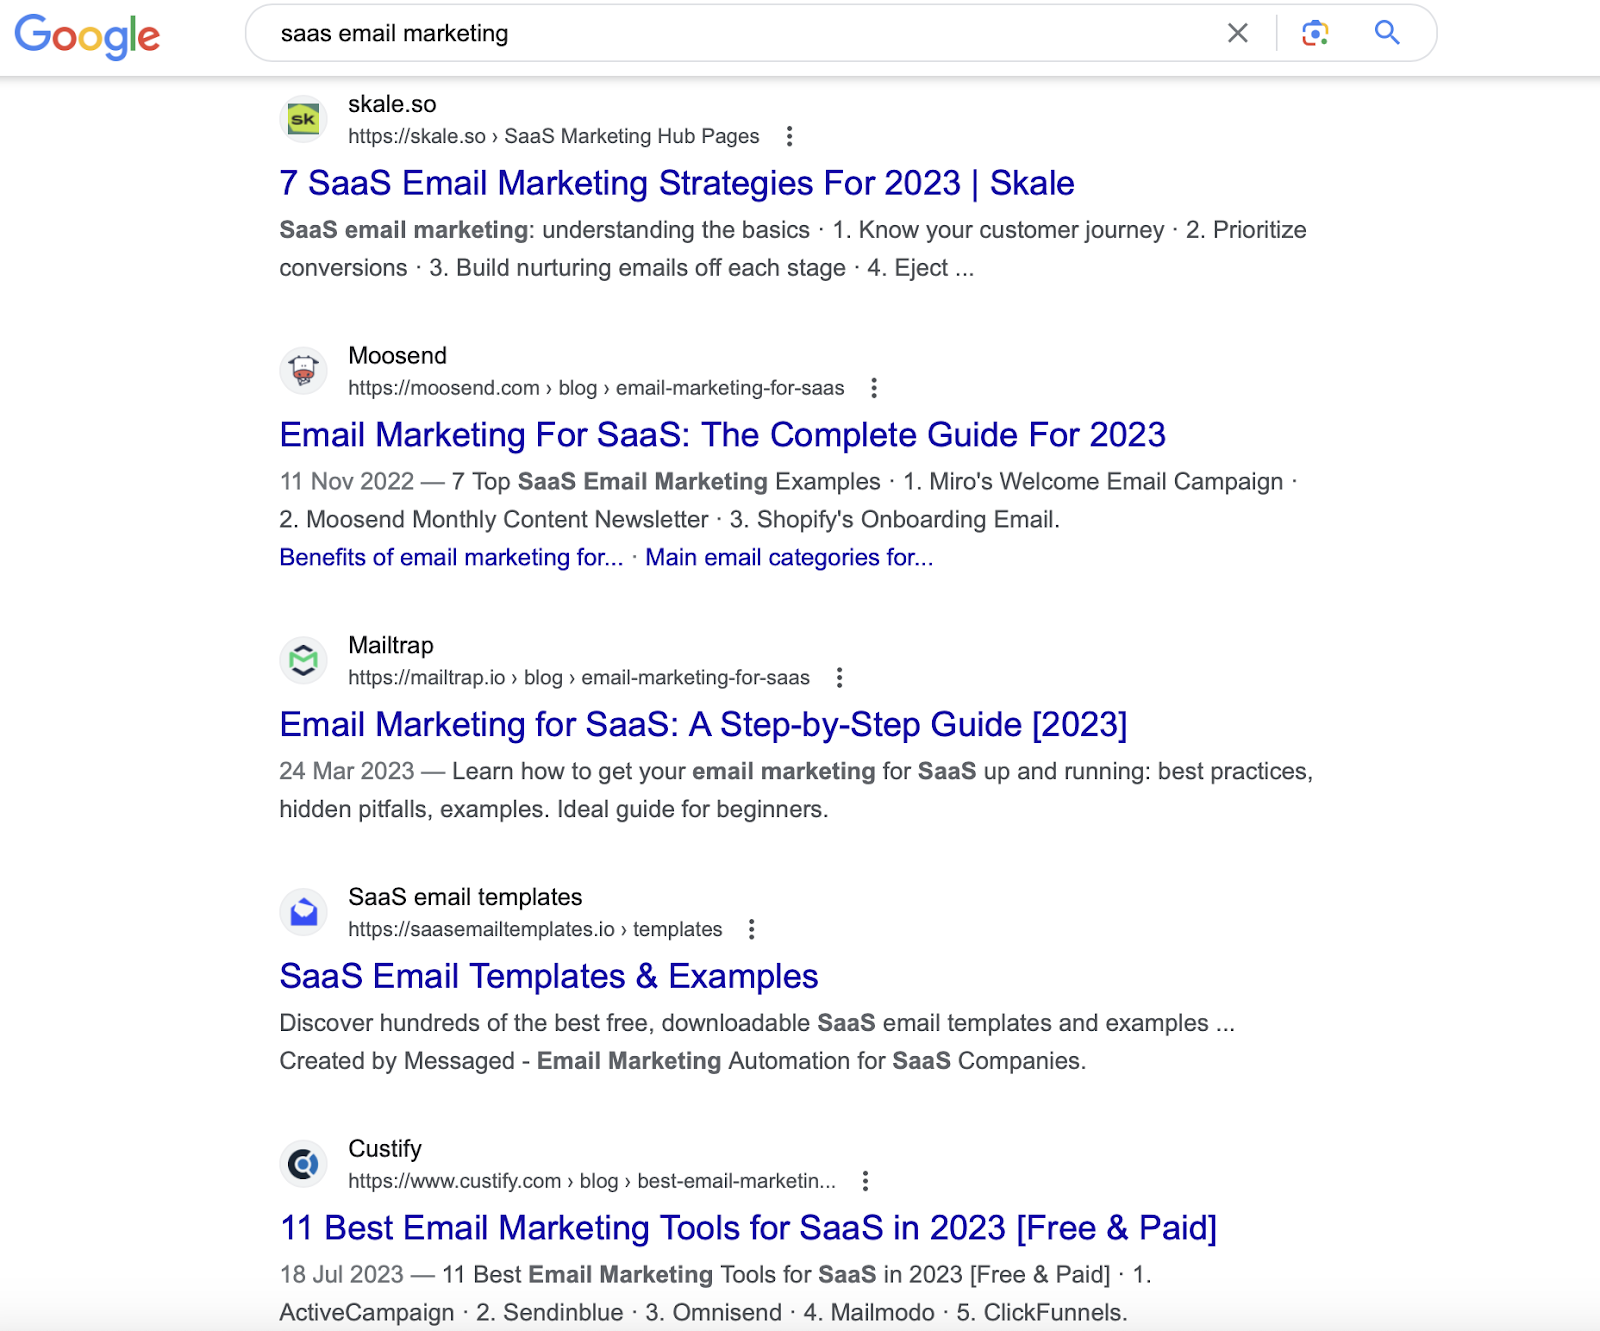 Google search for "SaaS email marketing"